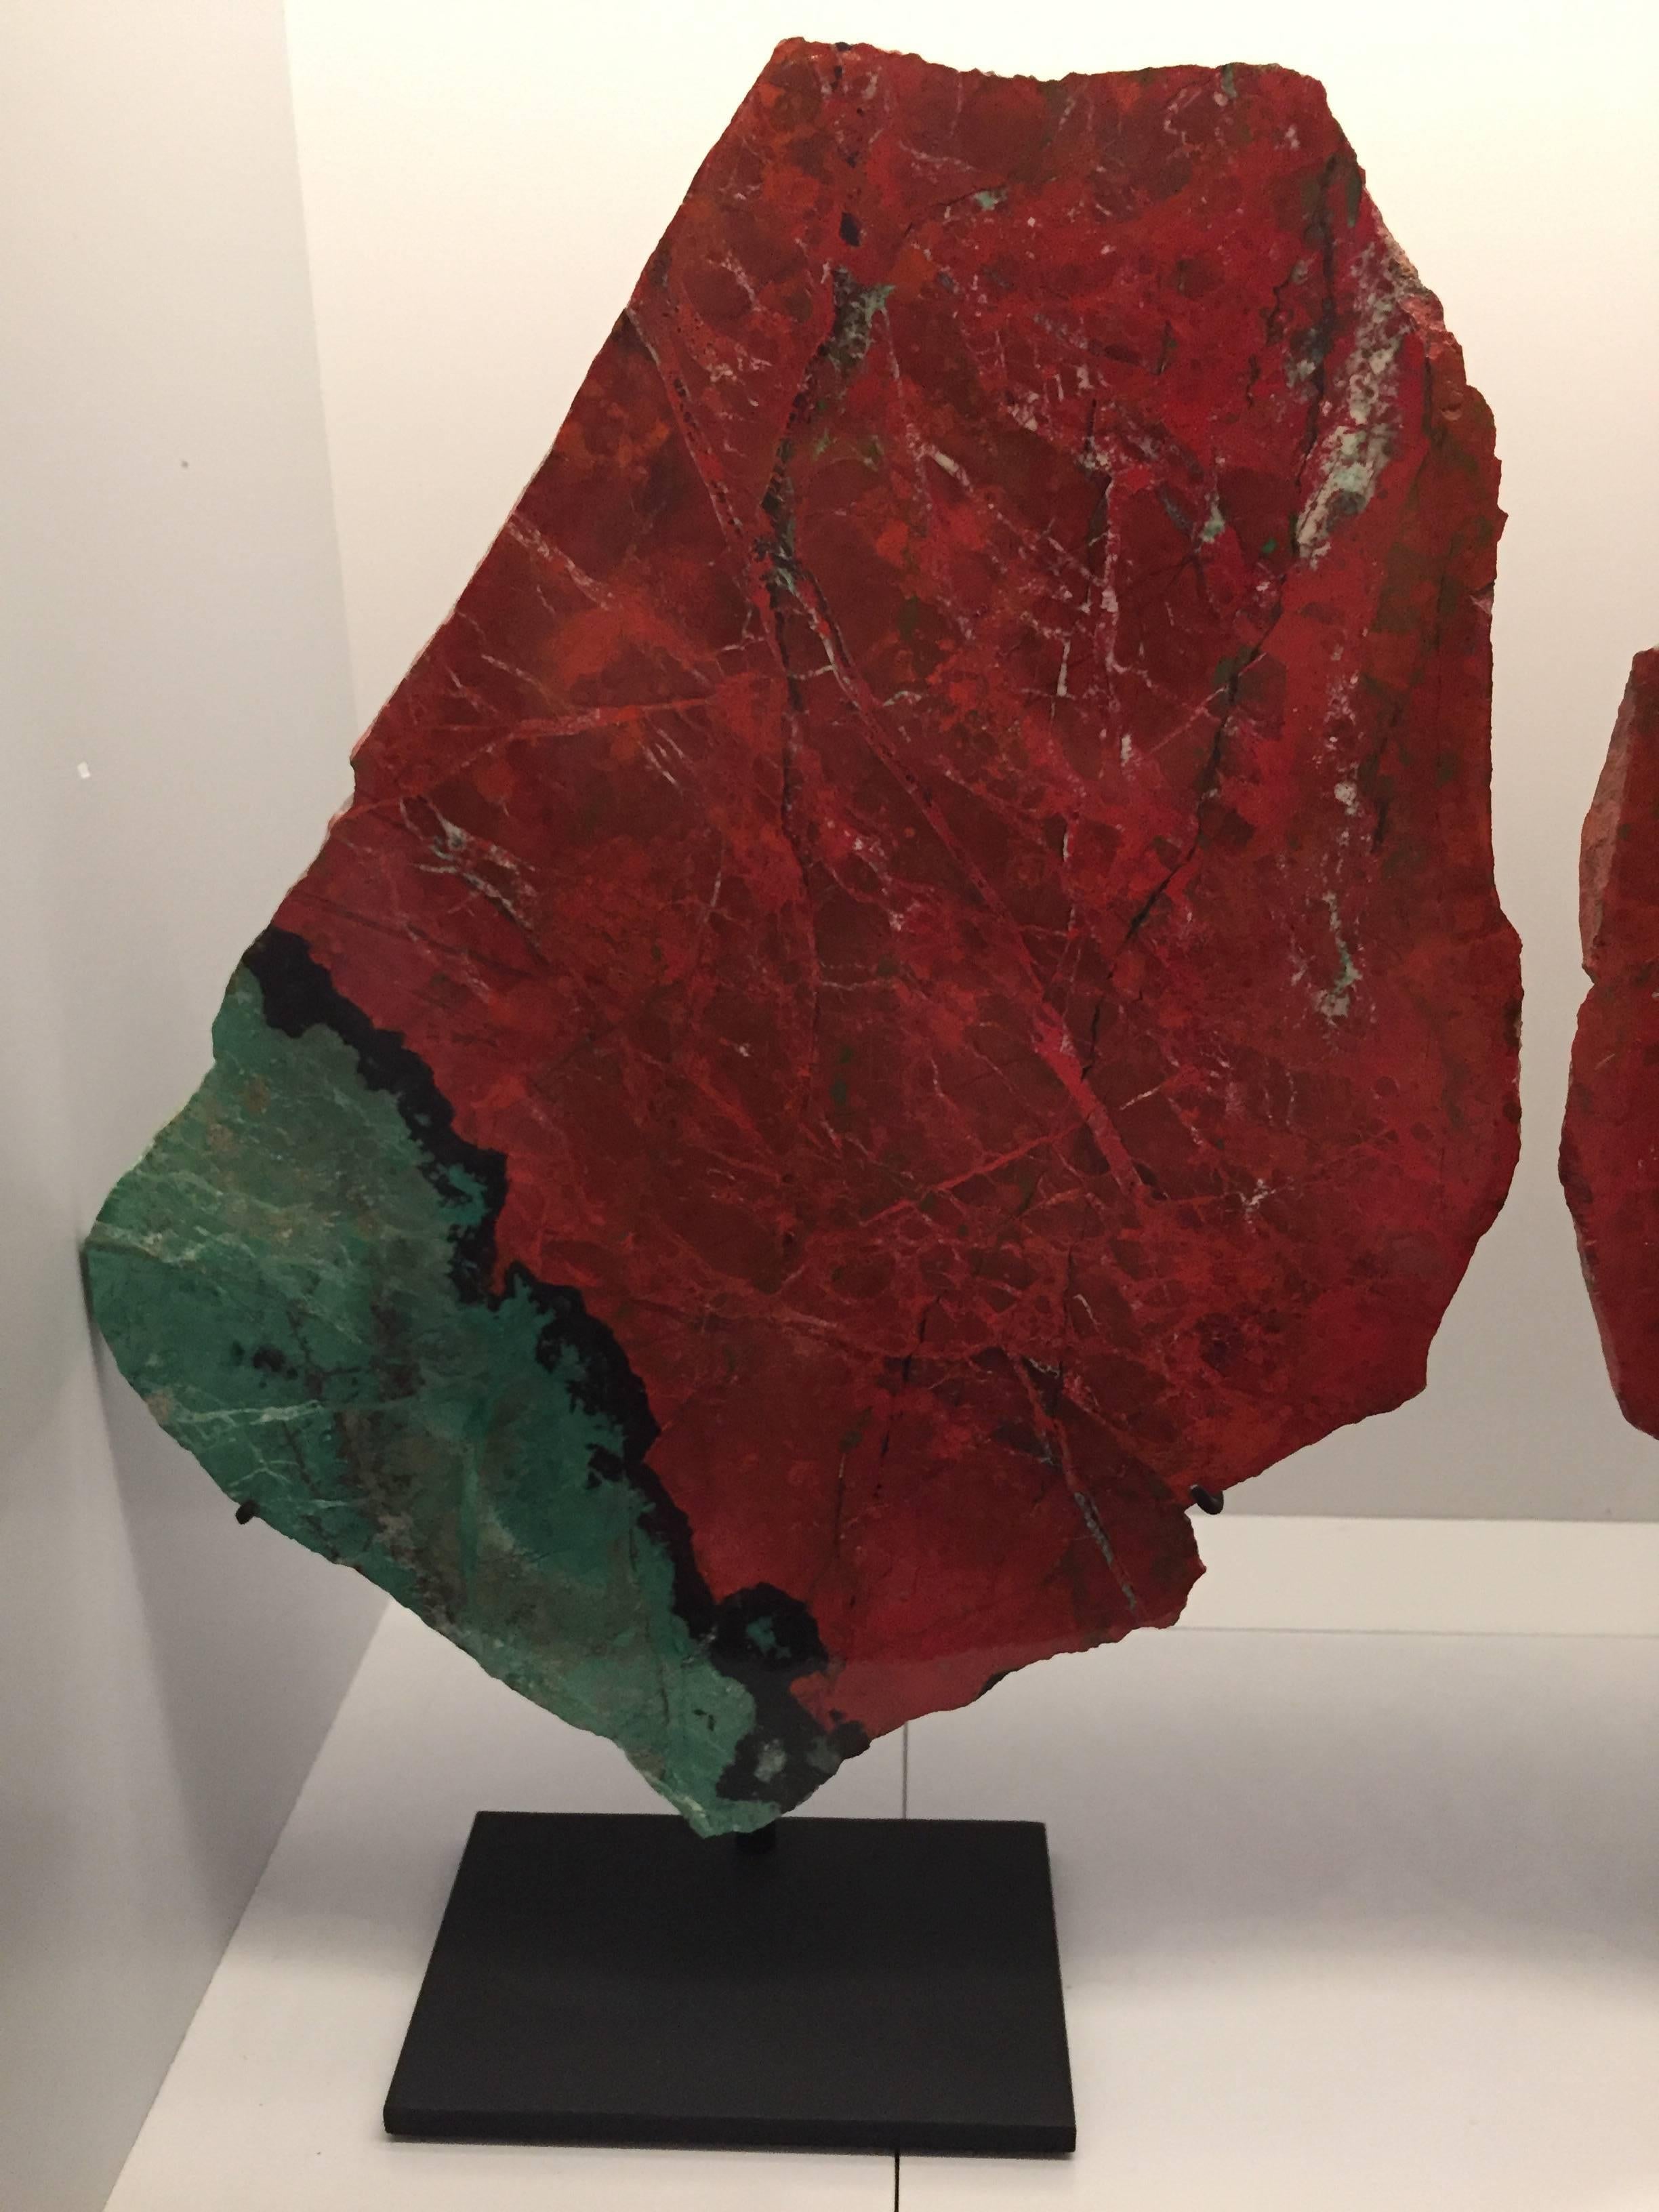 Large bookmatched pair of mounted green and red cuprite chrysocolla specimens AKA Sonora sunset or Sonora sunrise. It is named for the colorful sunsets over the Sonoran Desert, where these specimens were mined.

Measures: 8.5